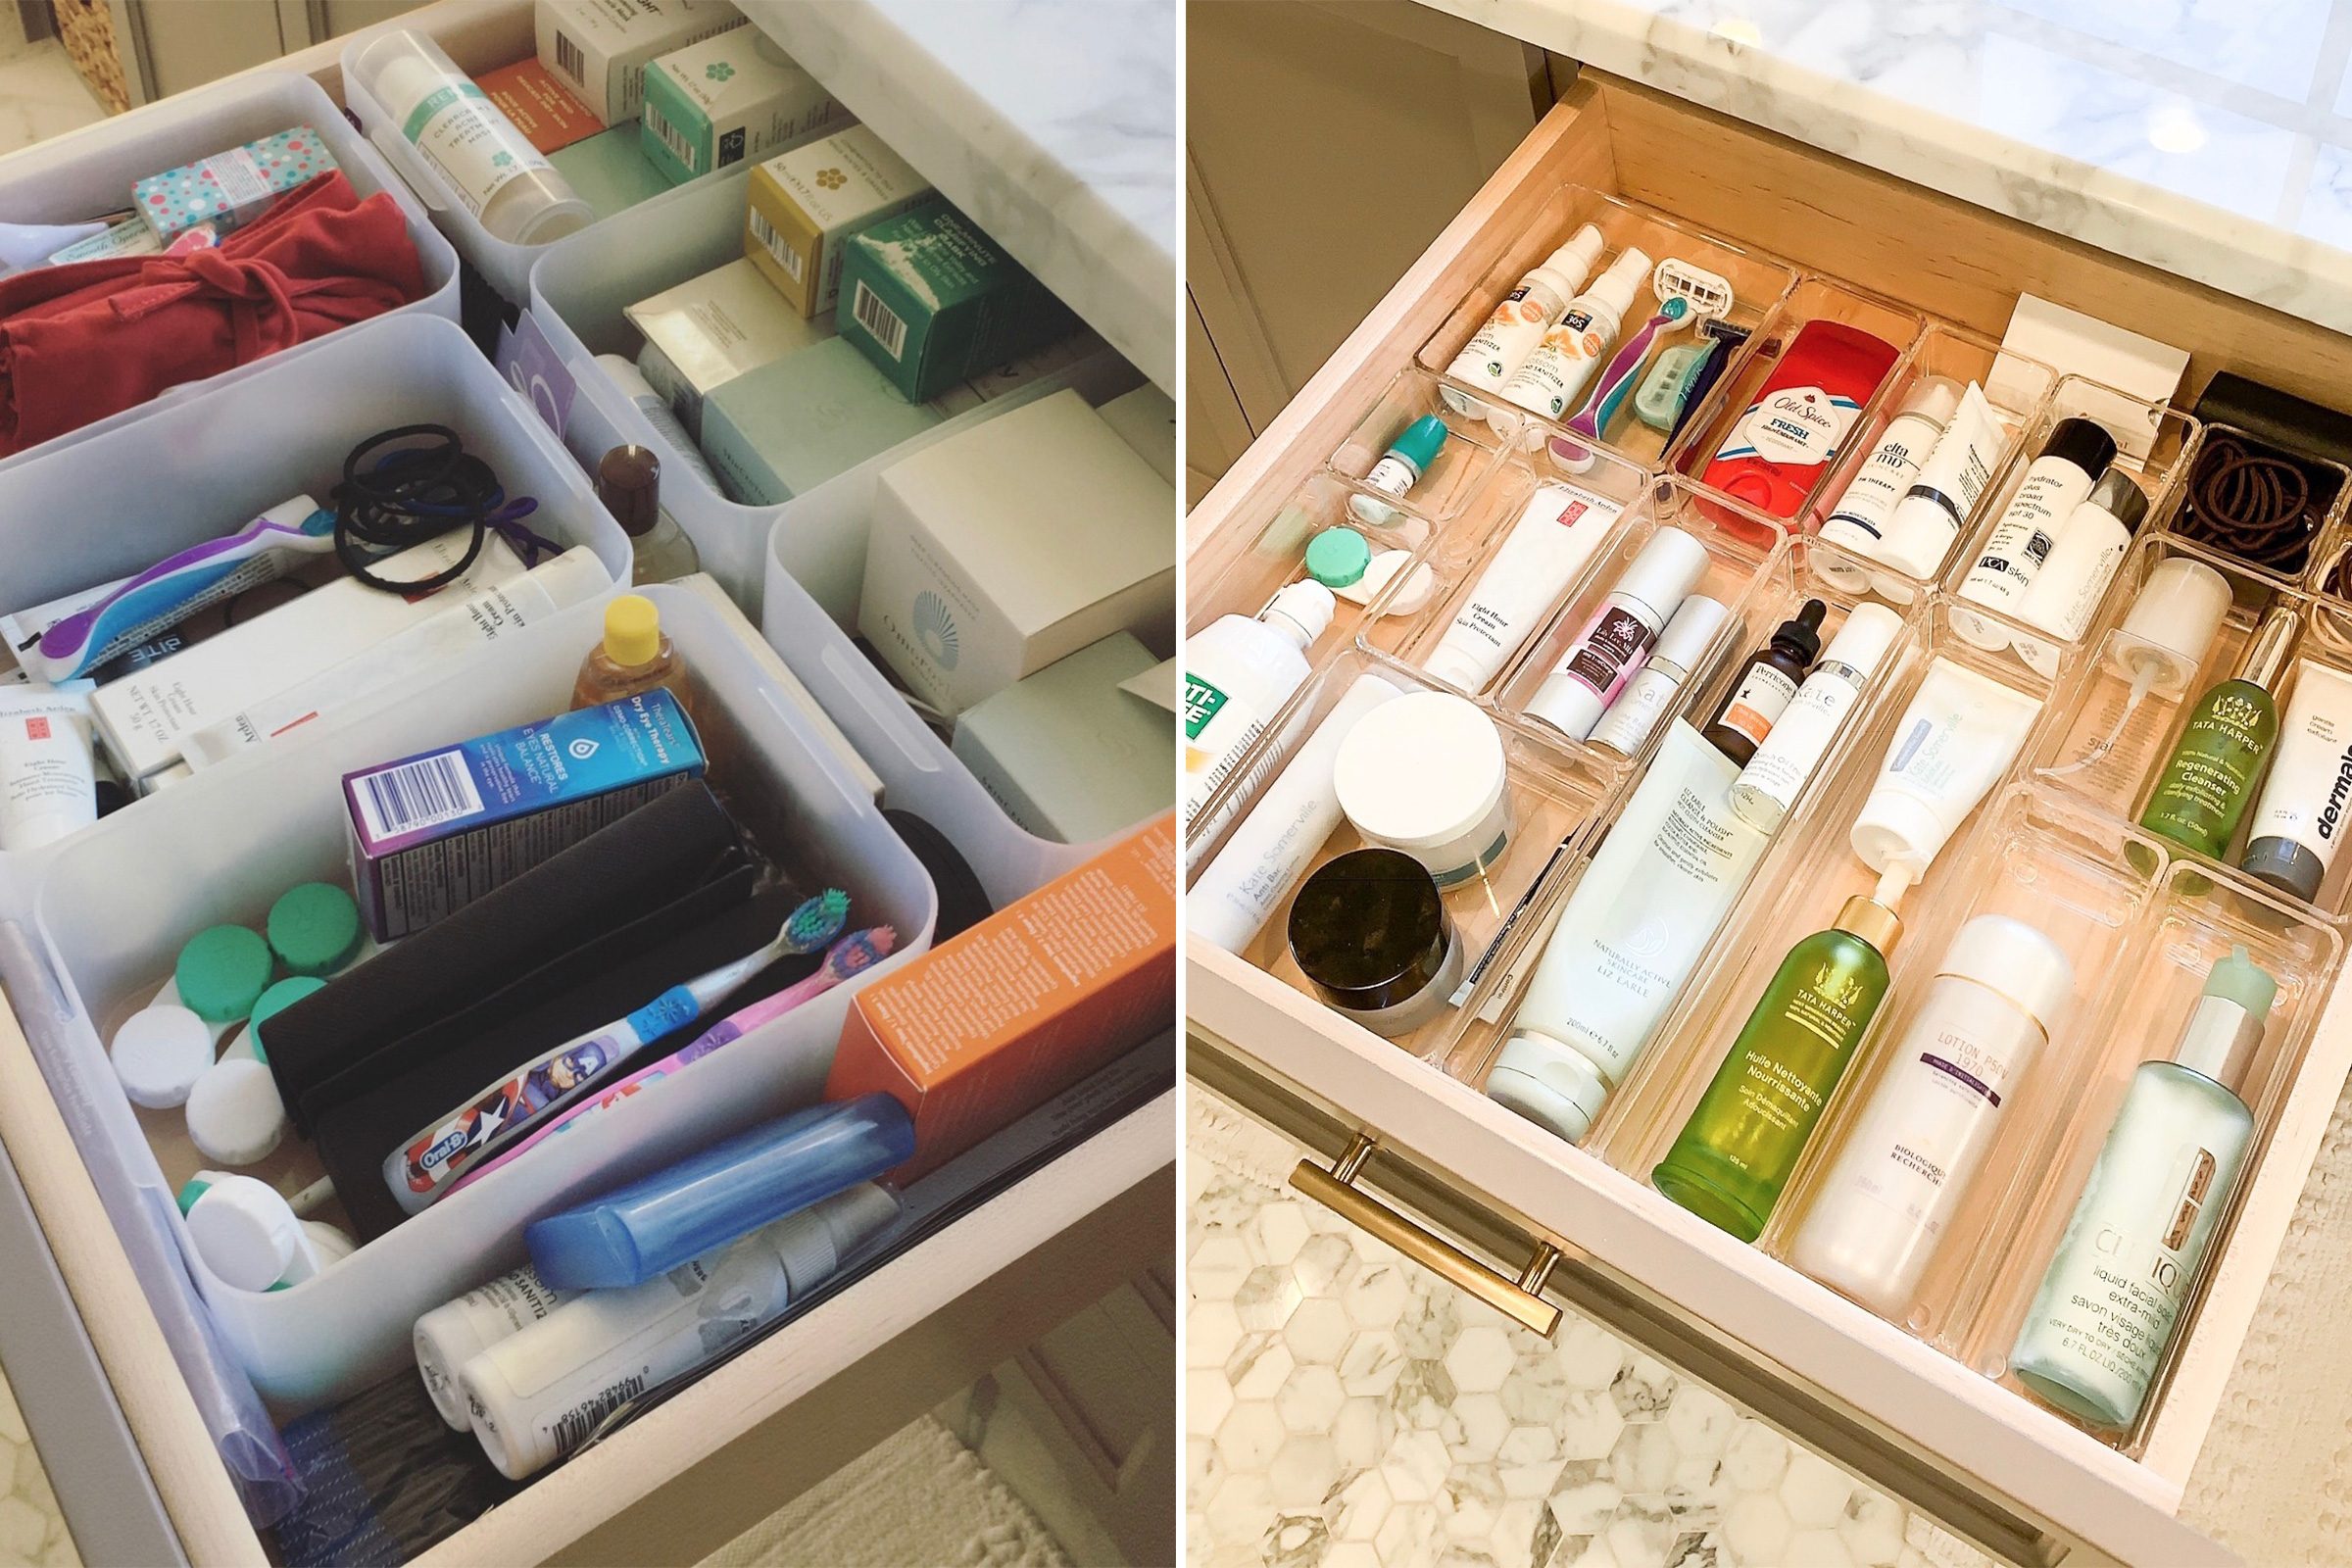 The Most Inspiring Home Organization Makeovers | Reader's Digest